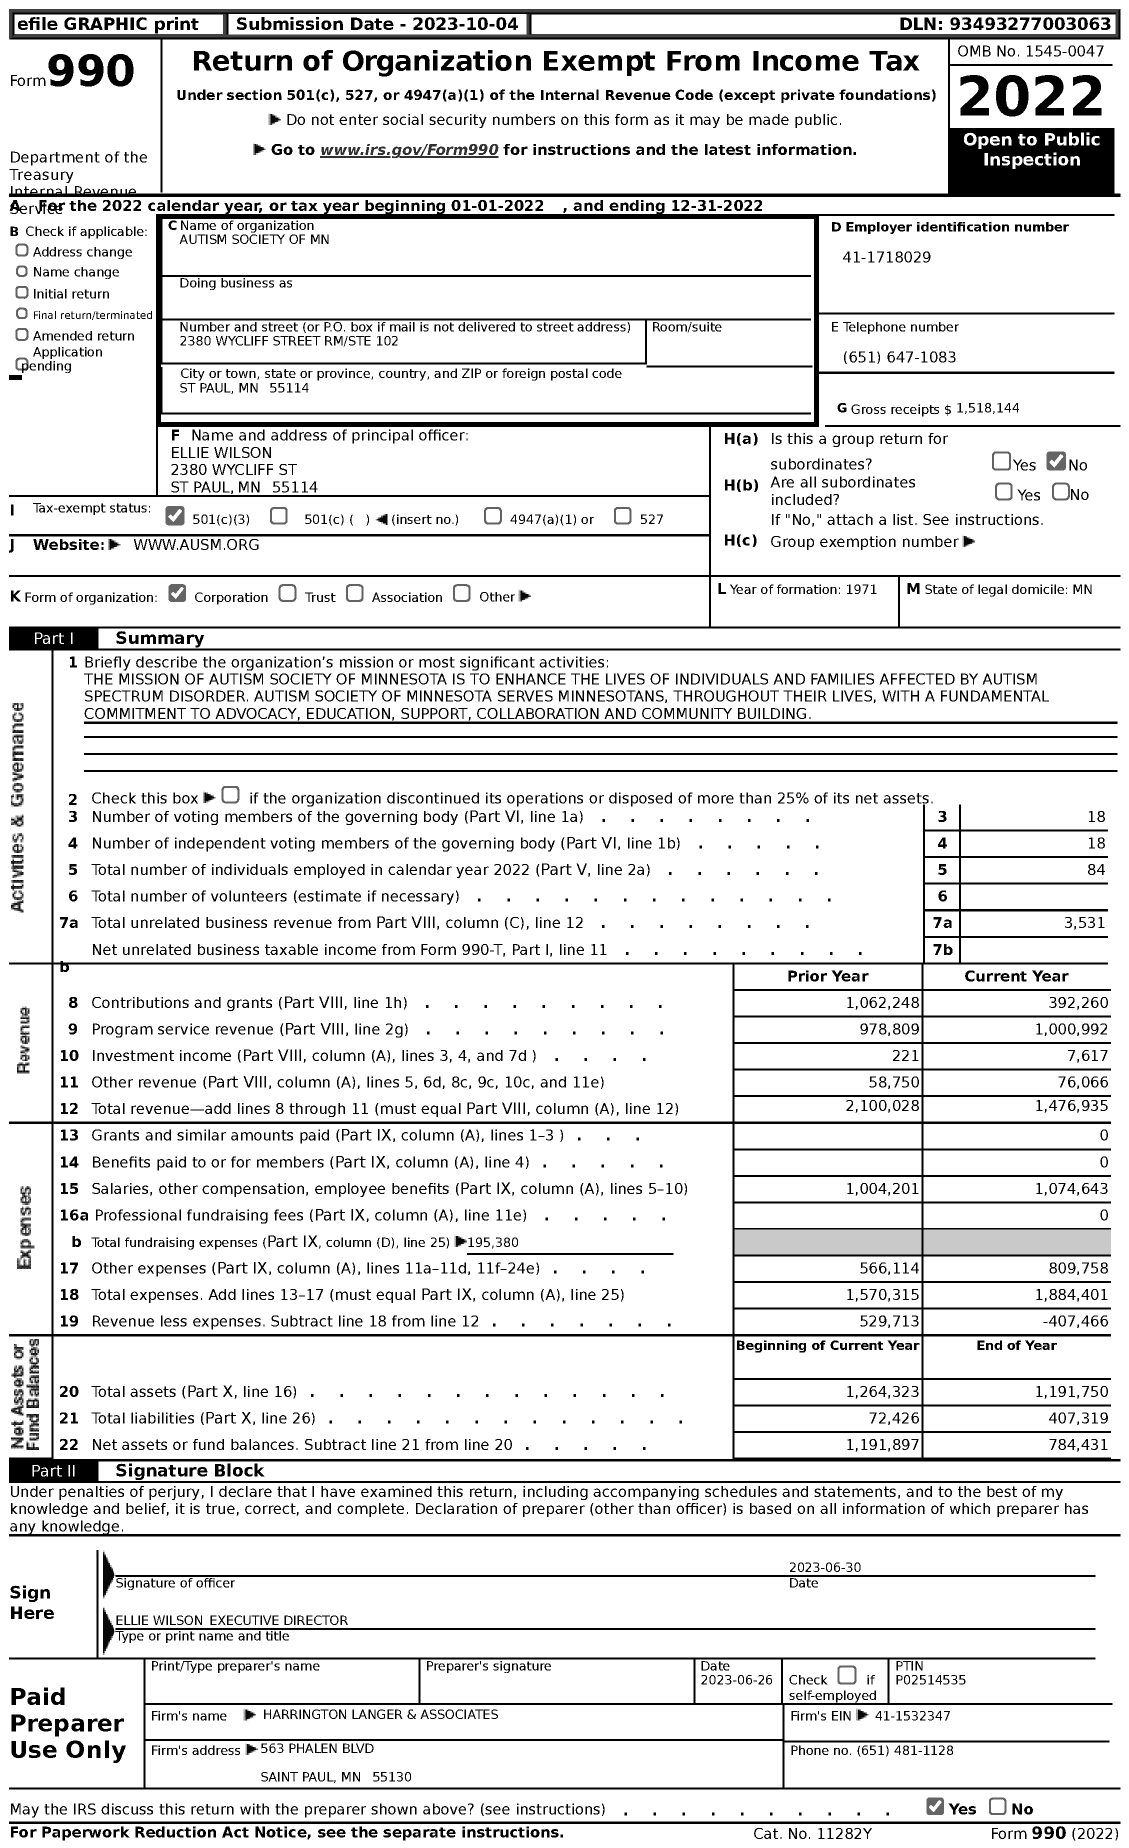 Image of first page of 2022 Form 990 for Autism Society of Minnesota (ASM)